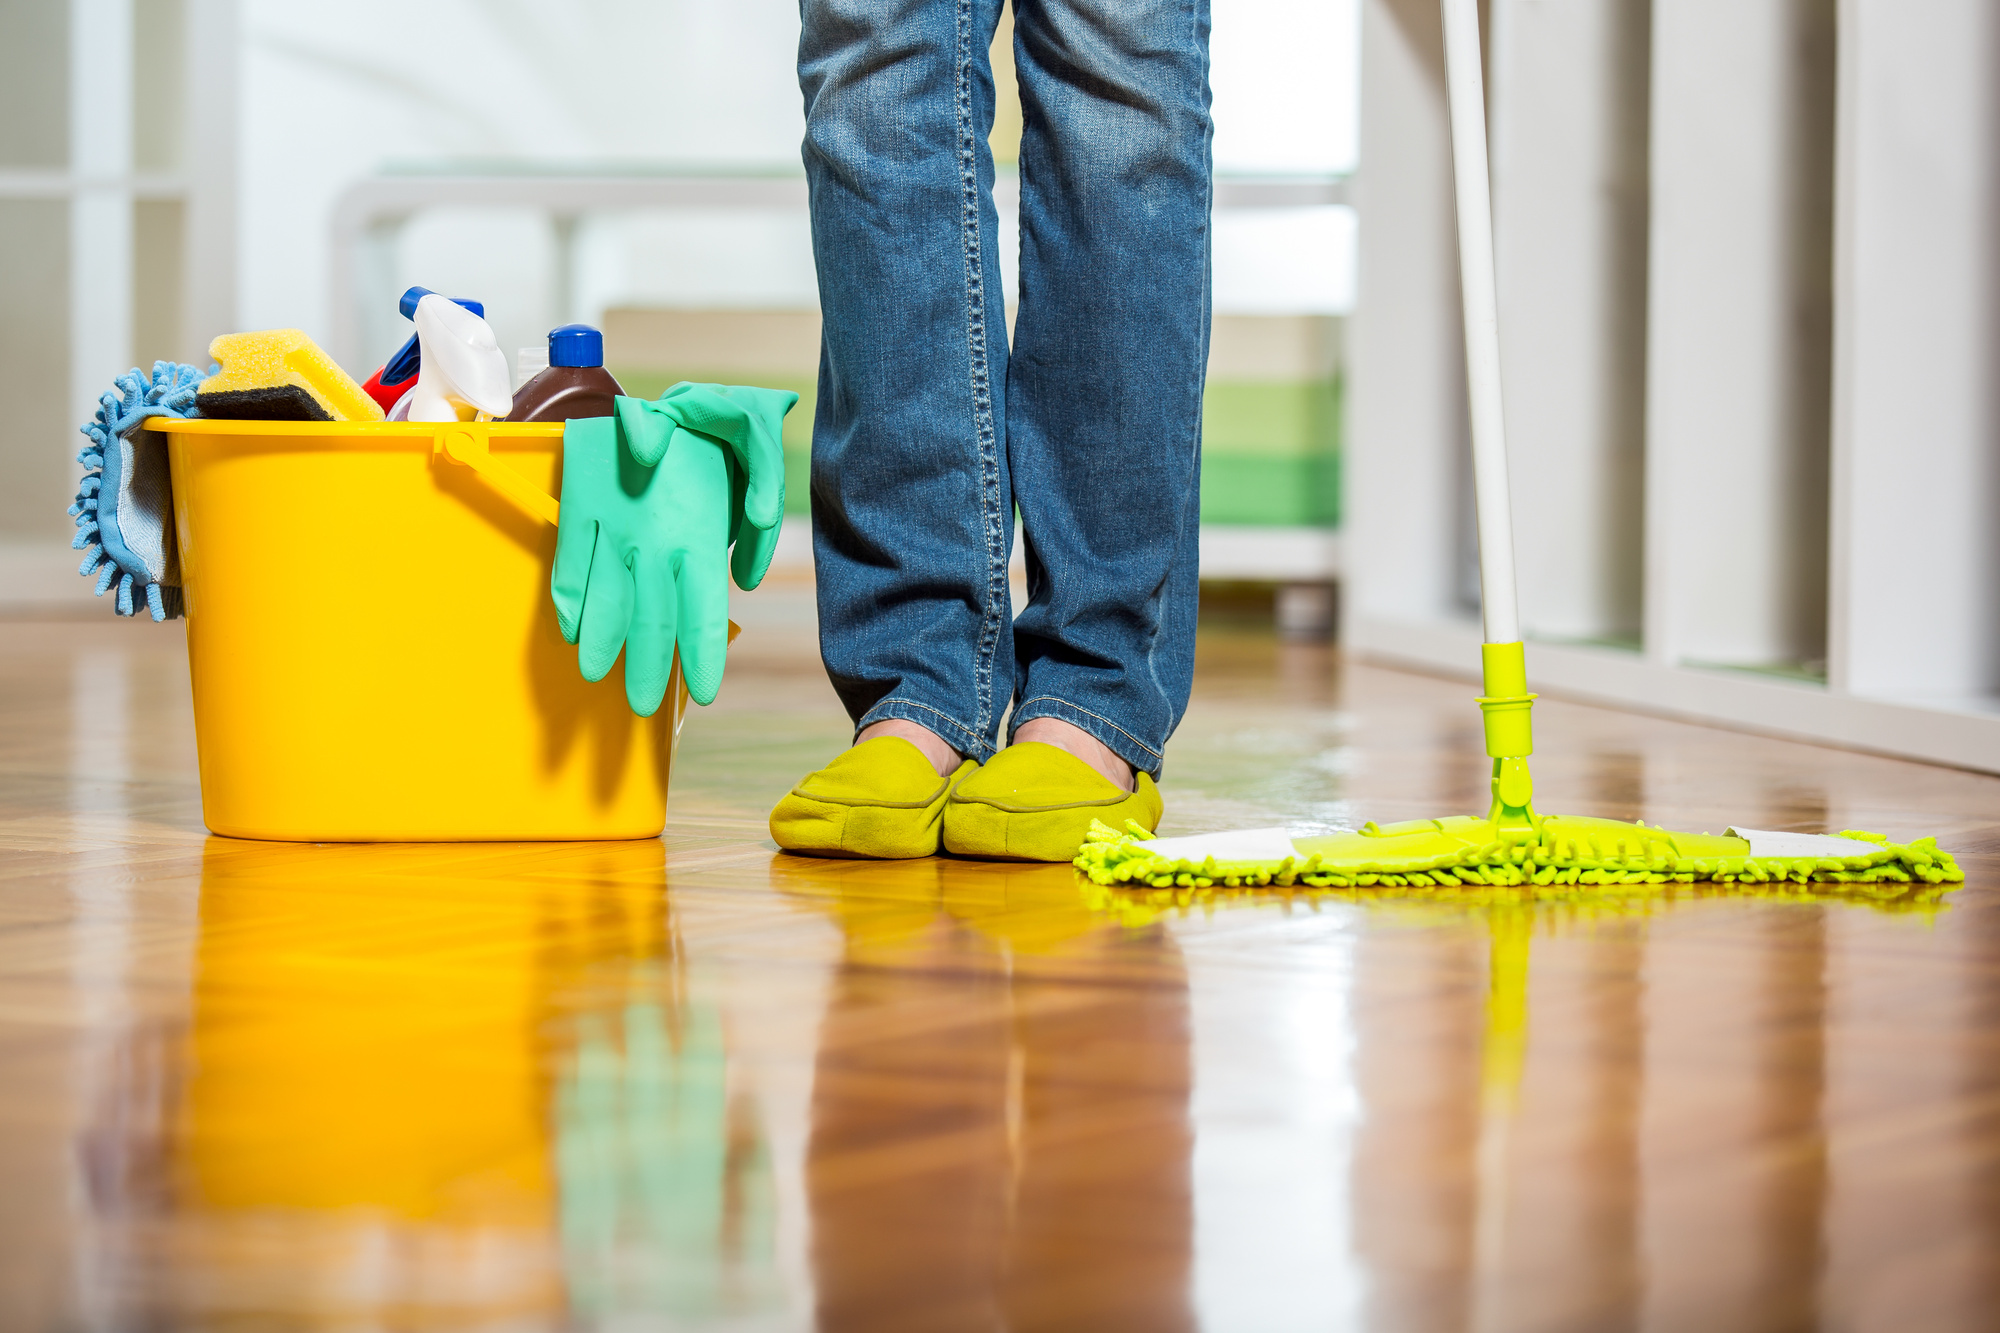 Ensure your home is perfectly clean by hiring professional deep cleaning services. We explain 5 big benefits to consider in this guide.